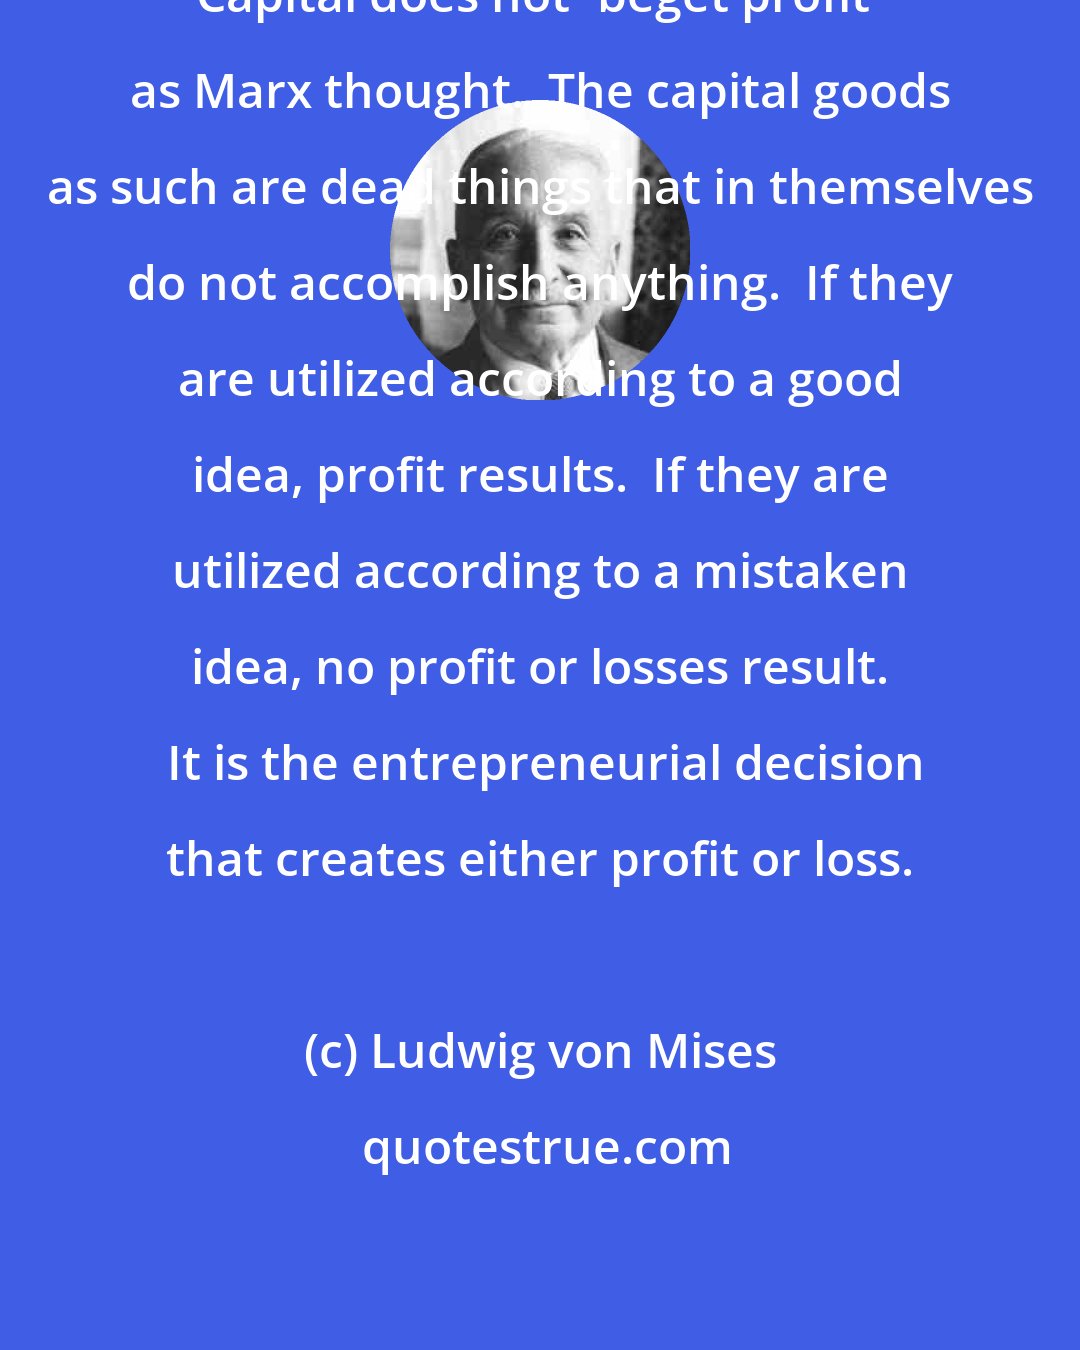 Ludwig von Mises: Capital does not 'beget profit' as Marx thought.  The capital goods as such are dead things that in themselves do not accomplish anything.  If they are utilized according to a good idea, profit results.  If they are utilized according to a mistaken idea, no profit or losses result.  It is the entrepreneurial decision that creates either profit or loss.